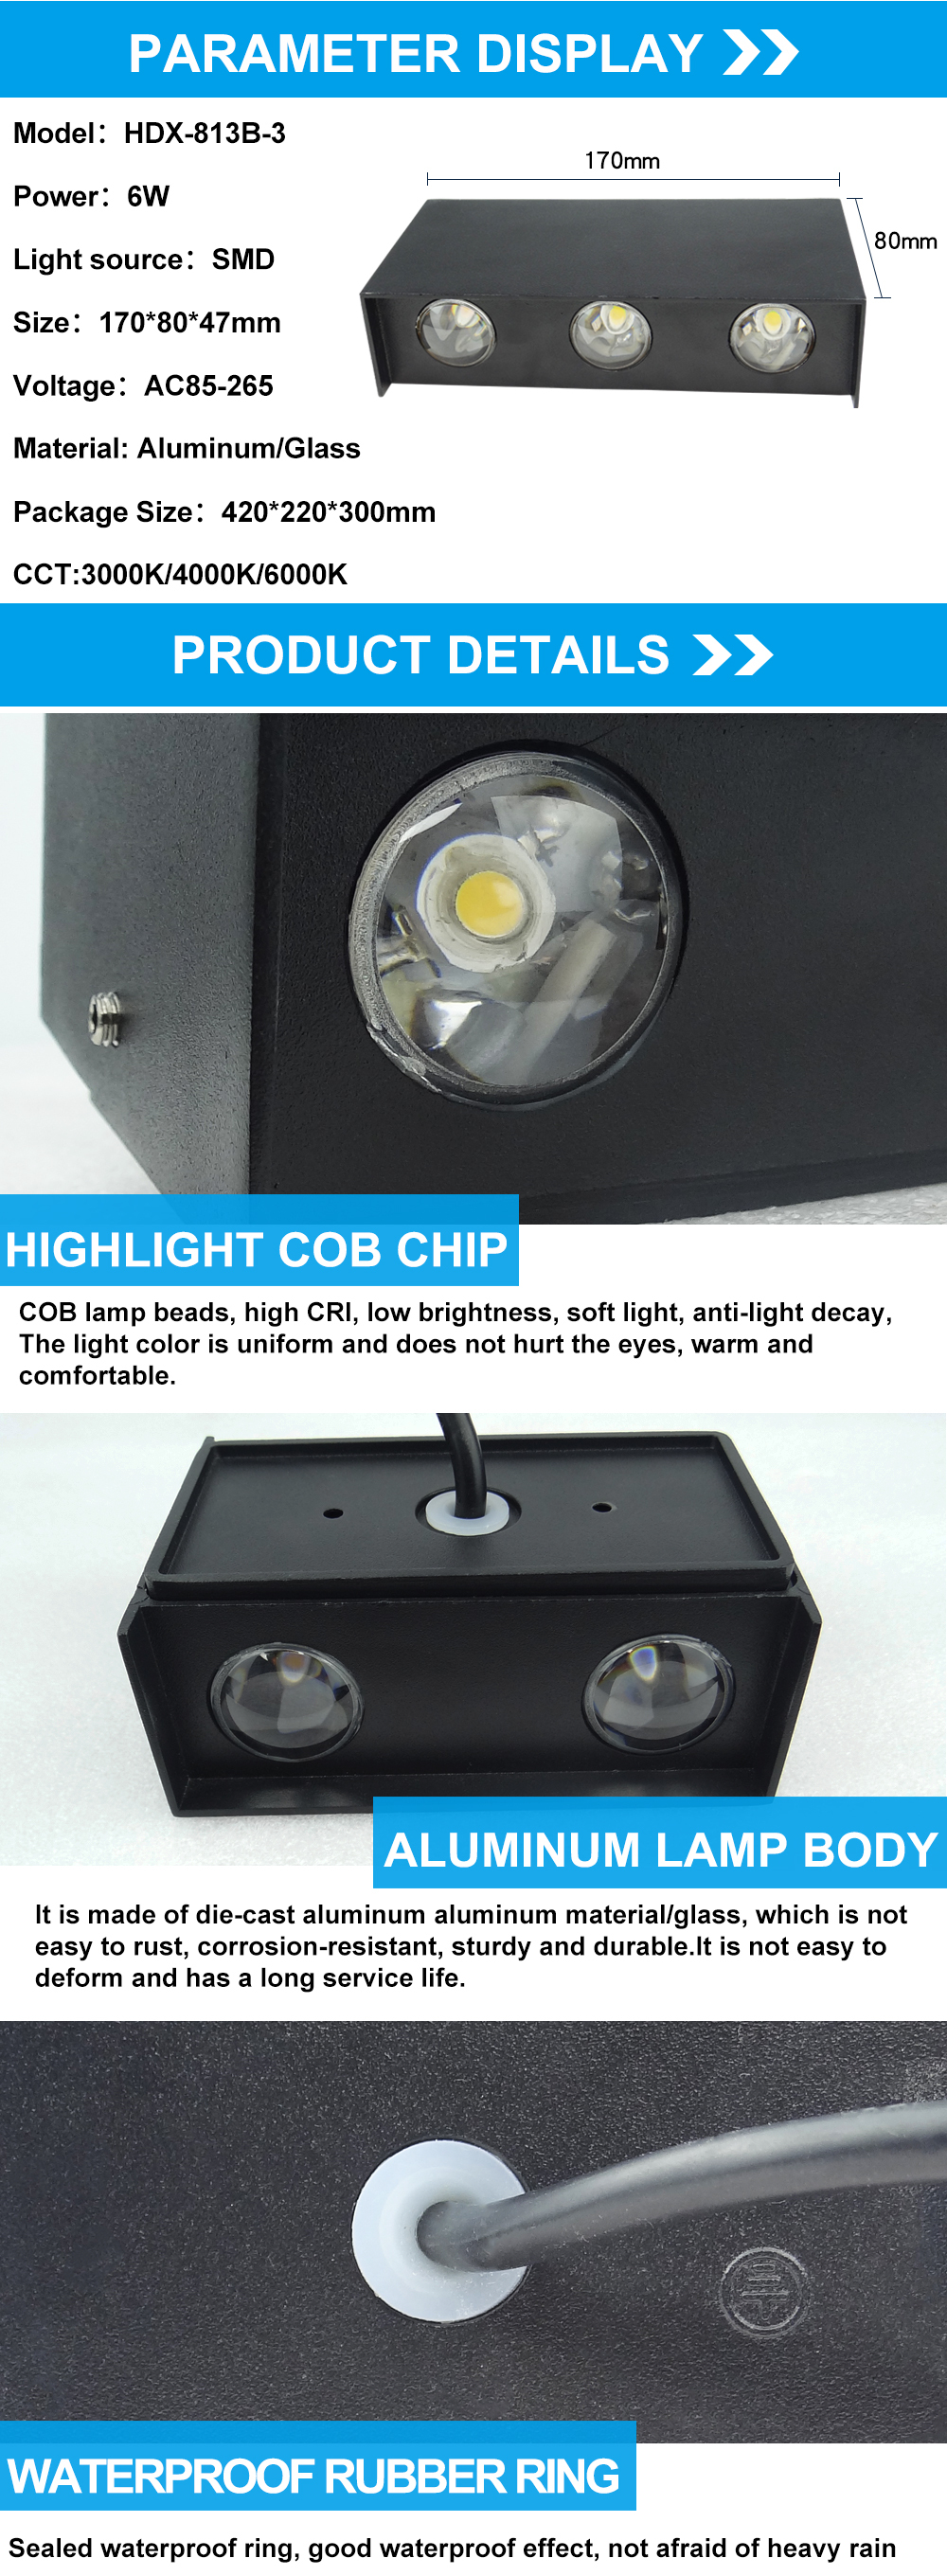 ODM/OEM cheap price exterior modern sconce lighting cube garden porch 2 years warranty waterproof led wall lamp